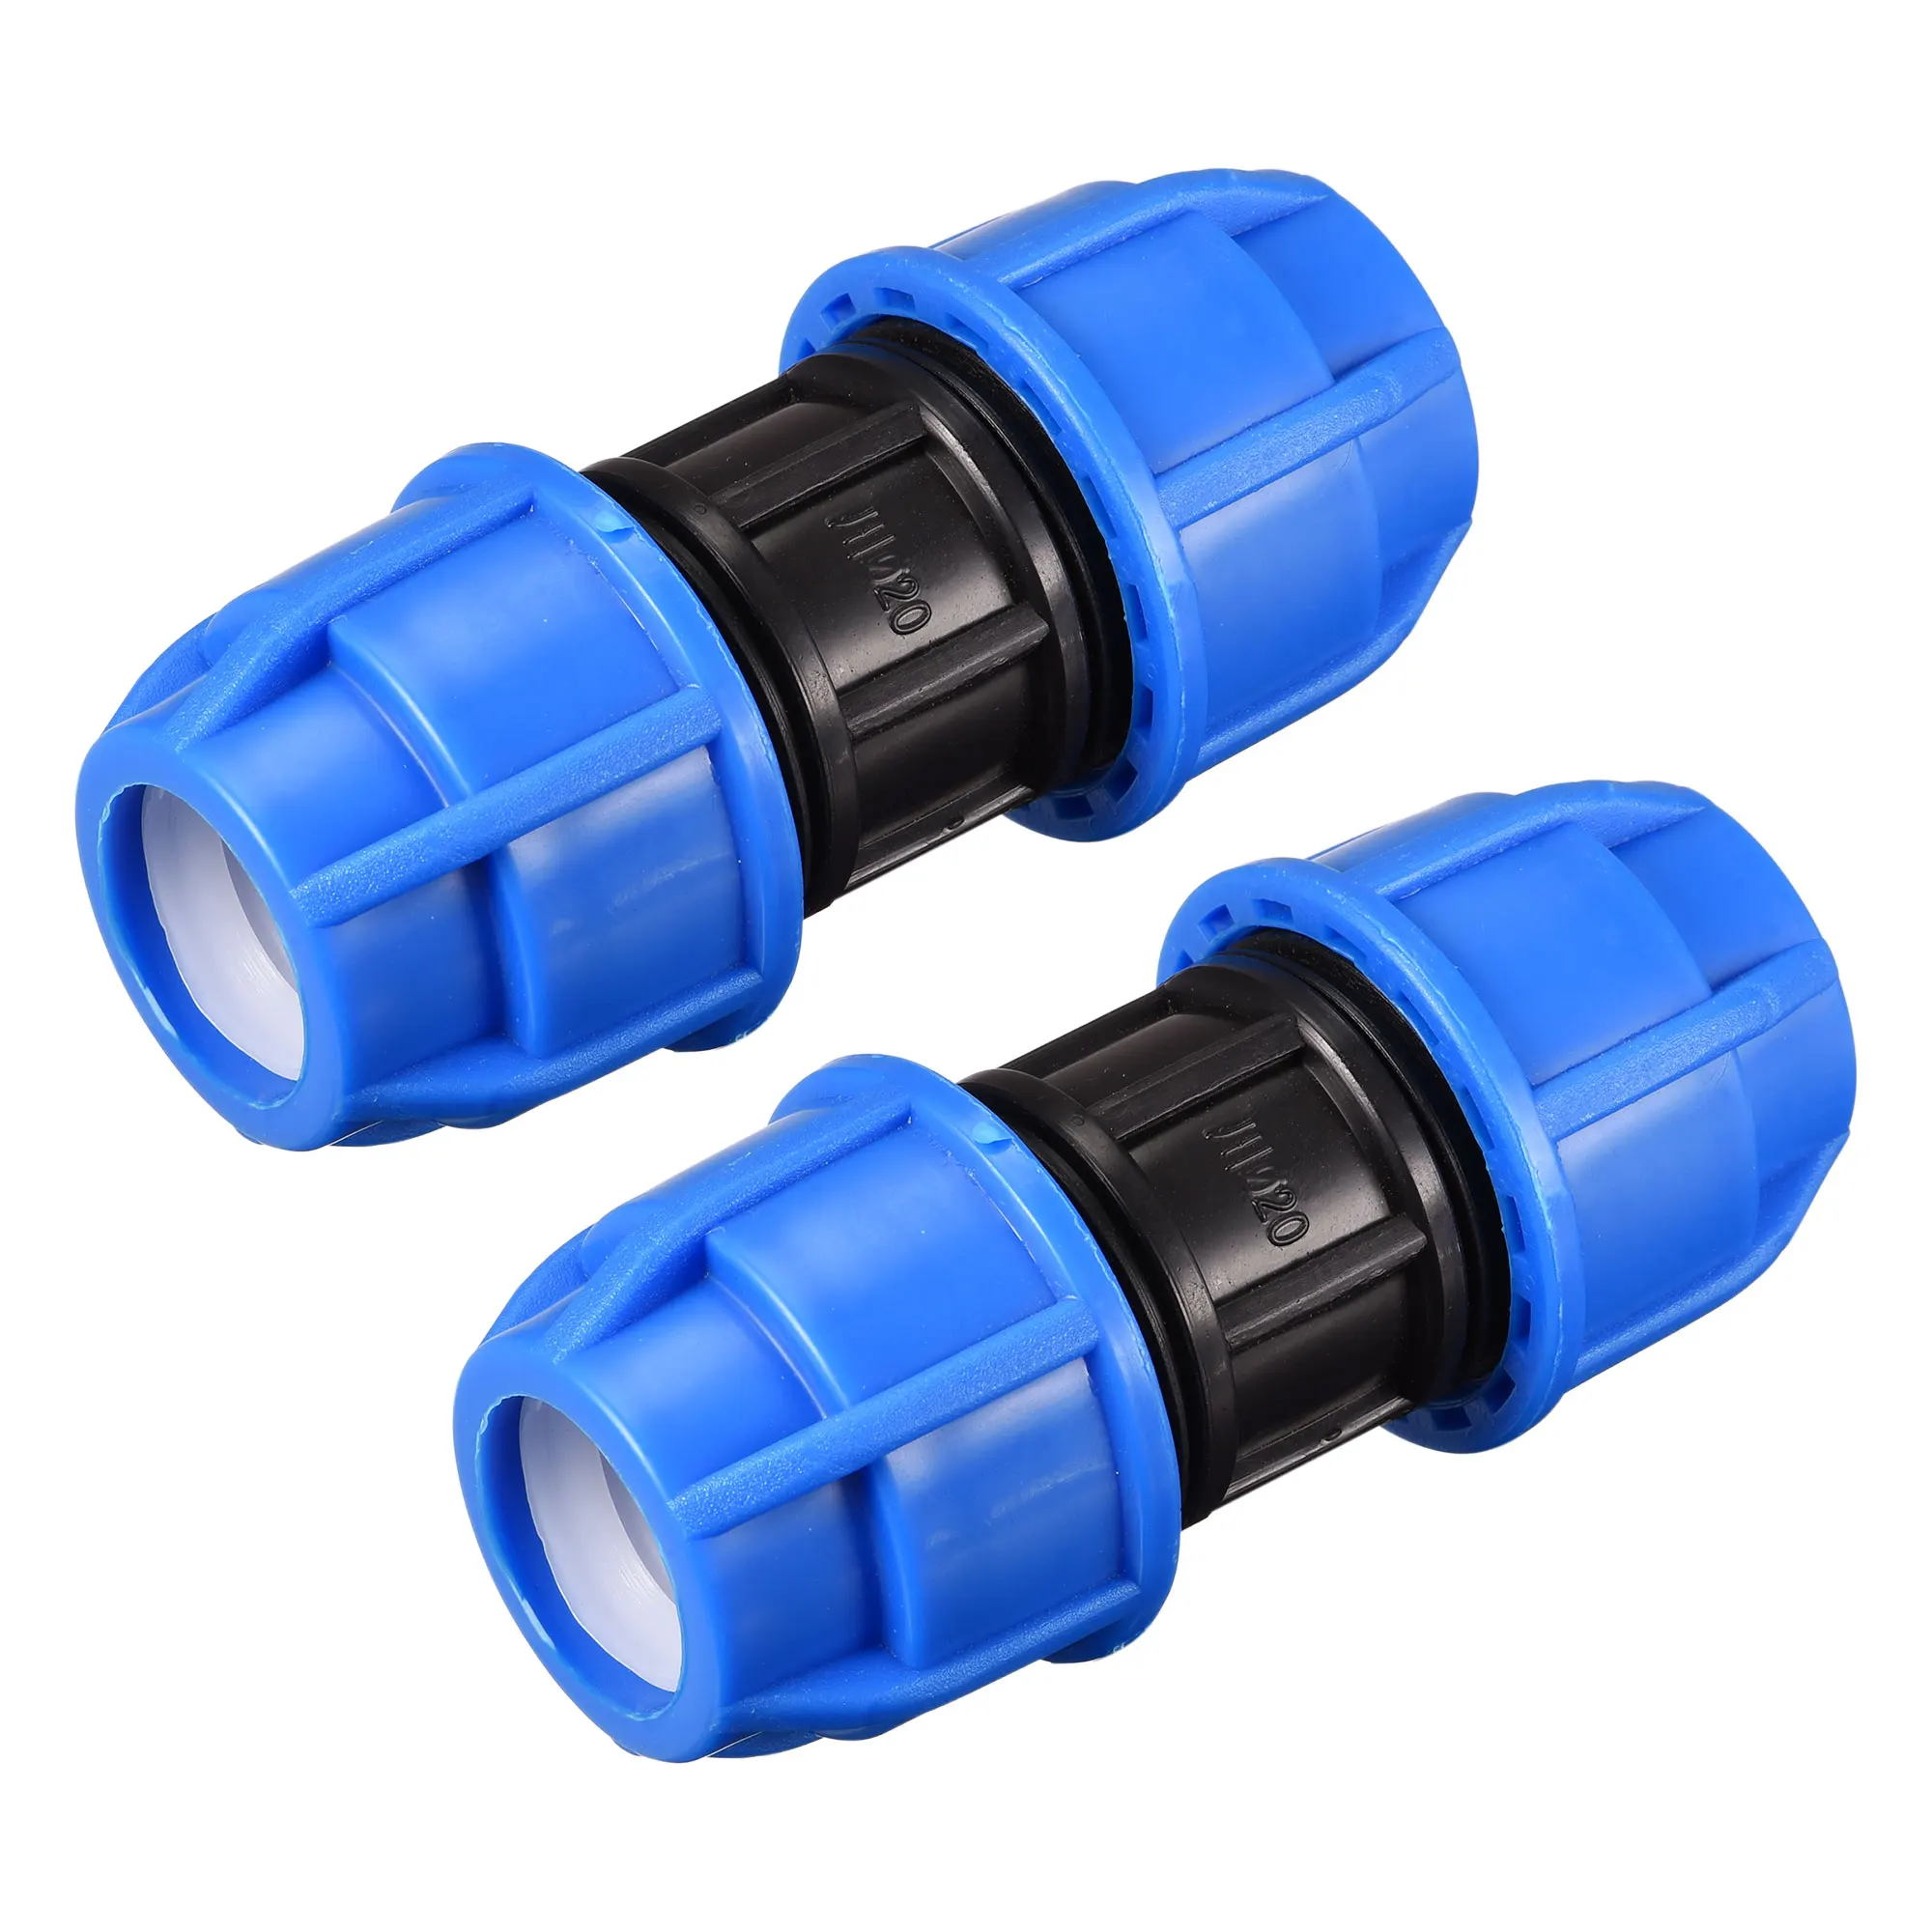 

Uxcell PE Tubing Straight Coupling Locking Fitting for 20mm Tubing Drip Tape Sprinkler System Blue Pack of 2